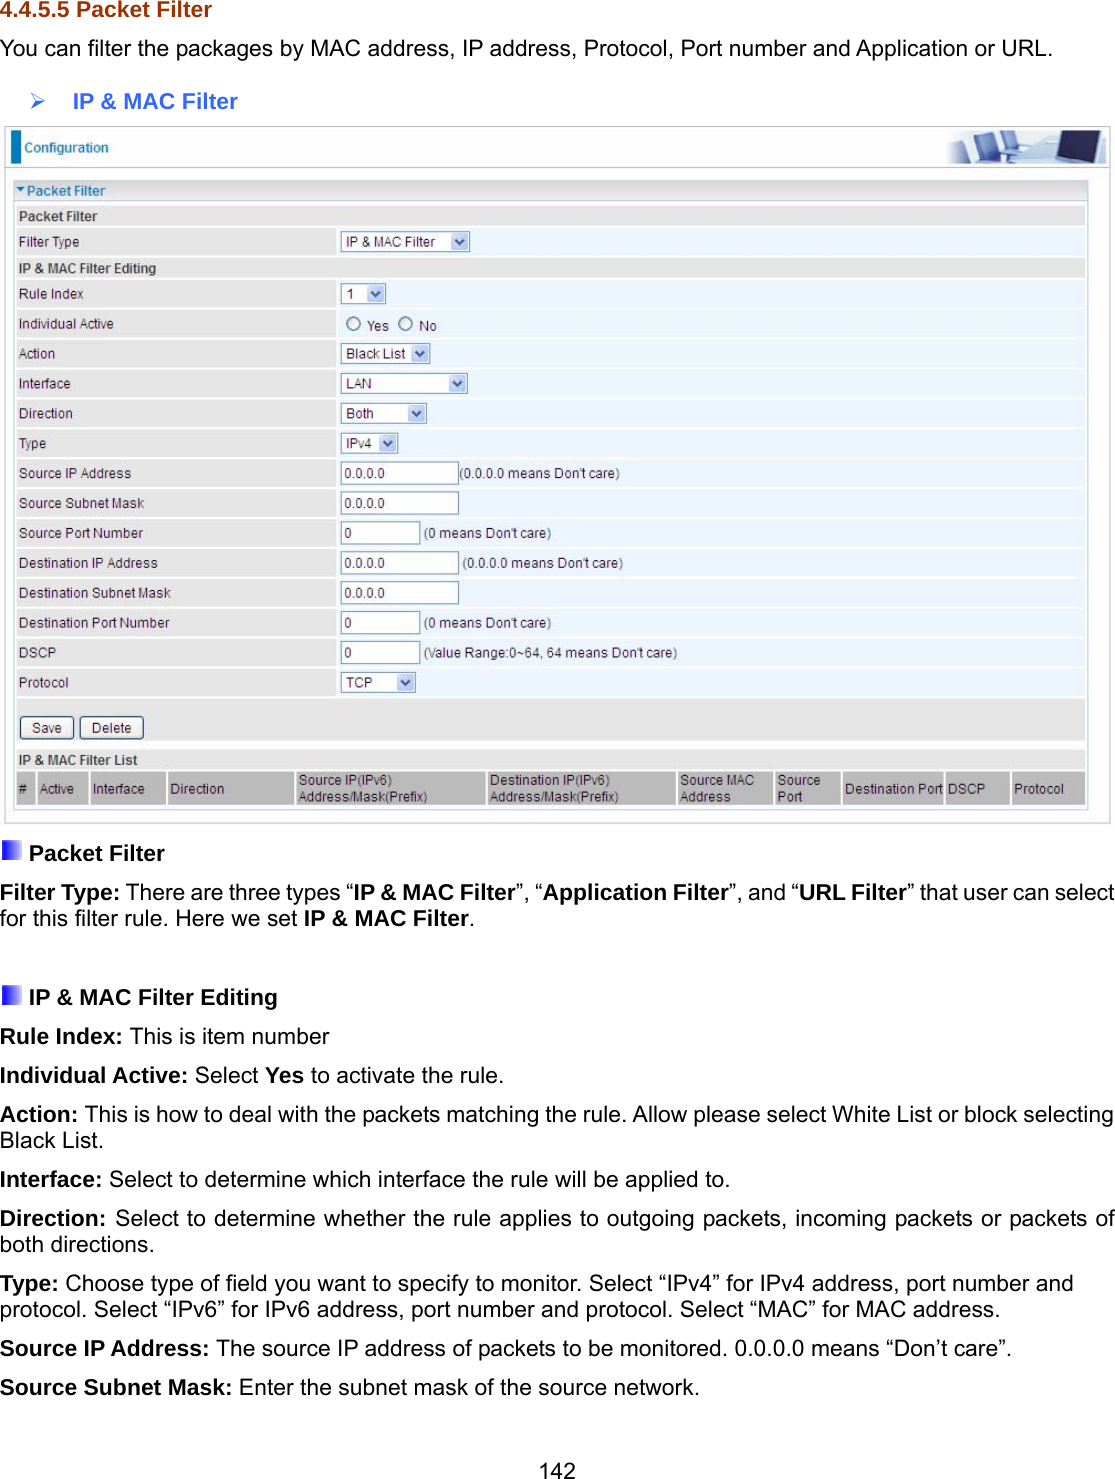 142 4.4.5.5 Packet Filter You can filter the packages by MAC address, IP address, Protocol, Port number and Application or URL.    IP &amp; MAC Filter   Packet Filter Filter Type: There are three types “IP &amp; MAC Filter”, “Application Filter”, and “URL Filter” that user can select for this filter rule. Here we set IP &amp; MAC Filter.   IP &amp; MAC Filter Editing Rule Index: This is item number Individual Active: Select Yes to activate the rule. Action: This is how to deal with the packets matching the rule. Allow please select White List or block selecting Black List. Interface: Select to determine which interface the rule will be applied to. Direction: Select to determine whether the rule applies to outgoing packets, incoming packets or packets of both directions. Type: Choose type of field you want to specify to monitor. Select “IPv4” for IPv4 address, port number and protocol. Select “IPv6” for IPv6 address, port number and protocol. Select “MAC” for MAC address.  Source IP Address: The source IP address of packets to be monitored. 0.0.0.0 means “Don’t care”. Source Subnet Mask: Enter the subnet mask of the source network. 